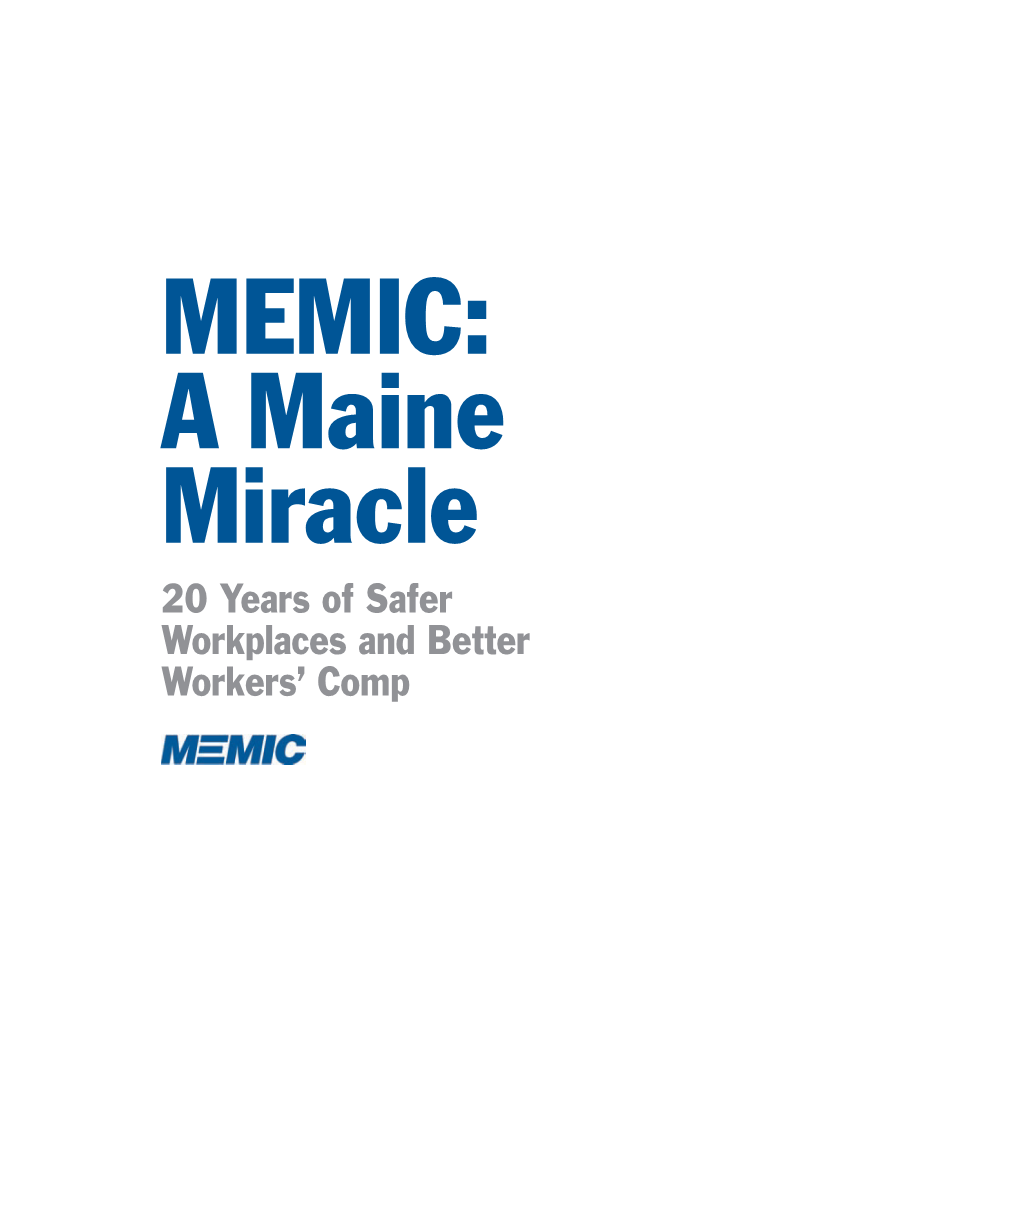 A Maine Miracle 20 Years of Safer Workplaces and Better Workers’ Comp